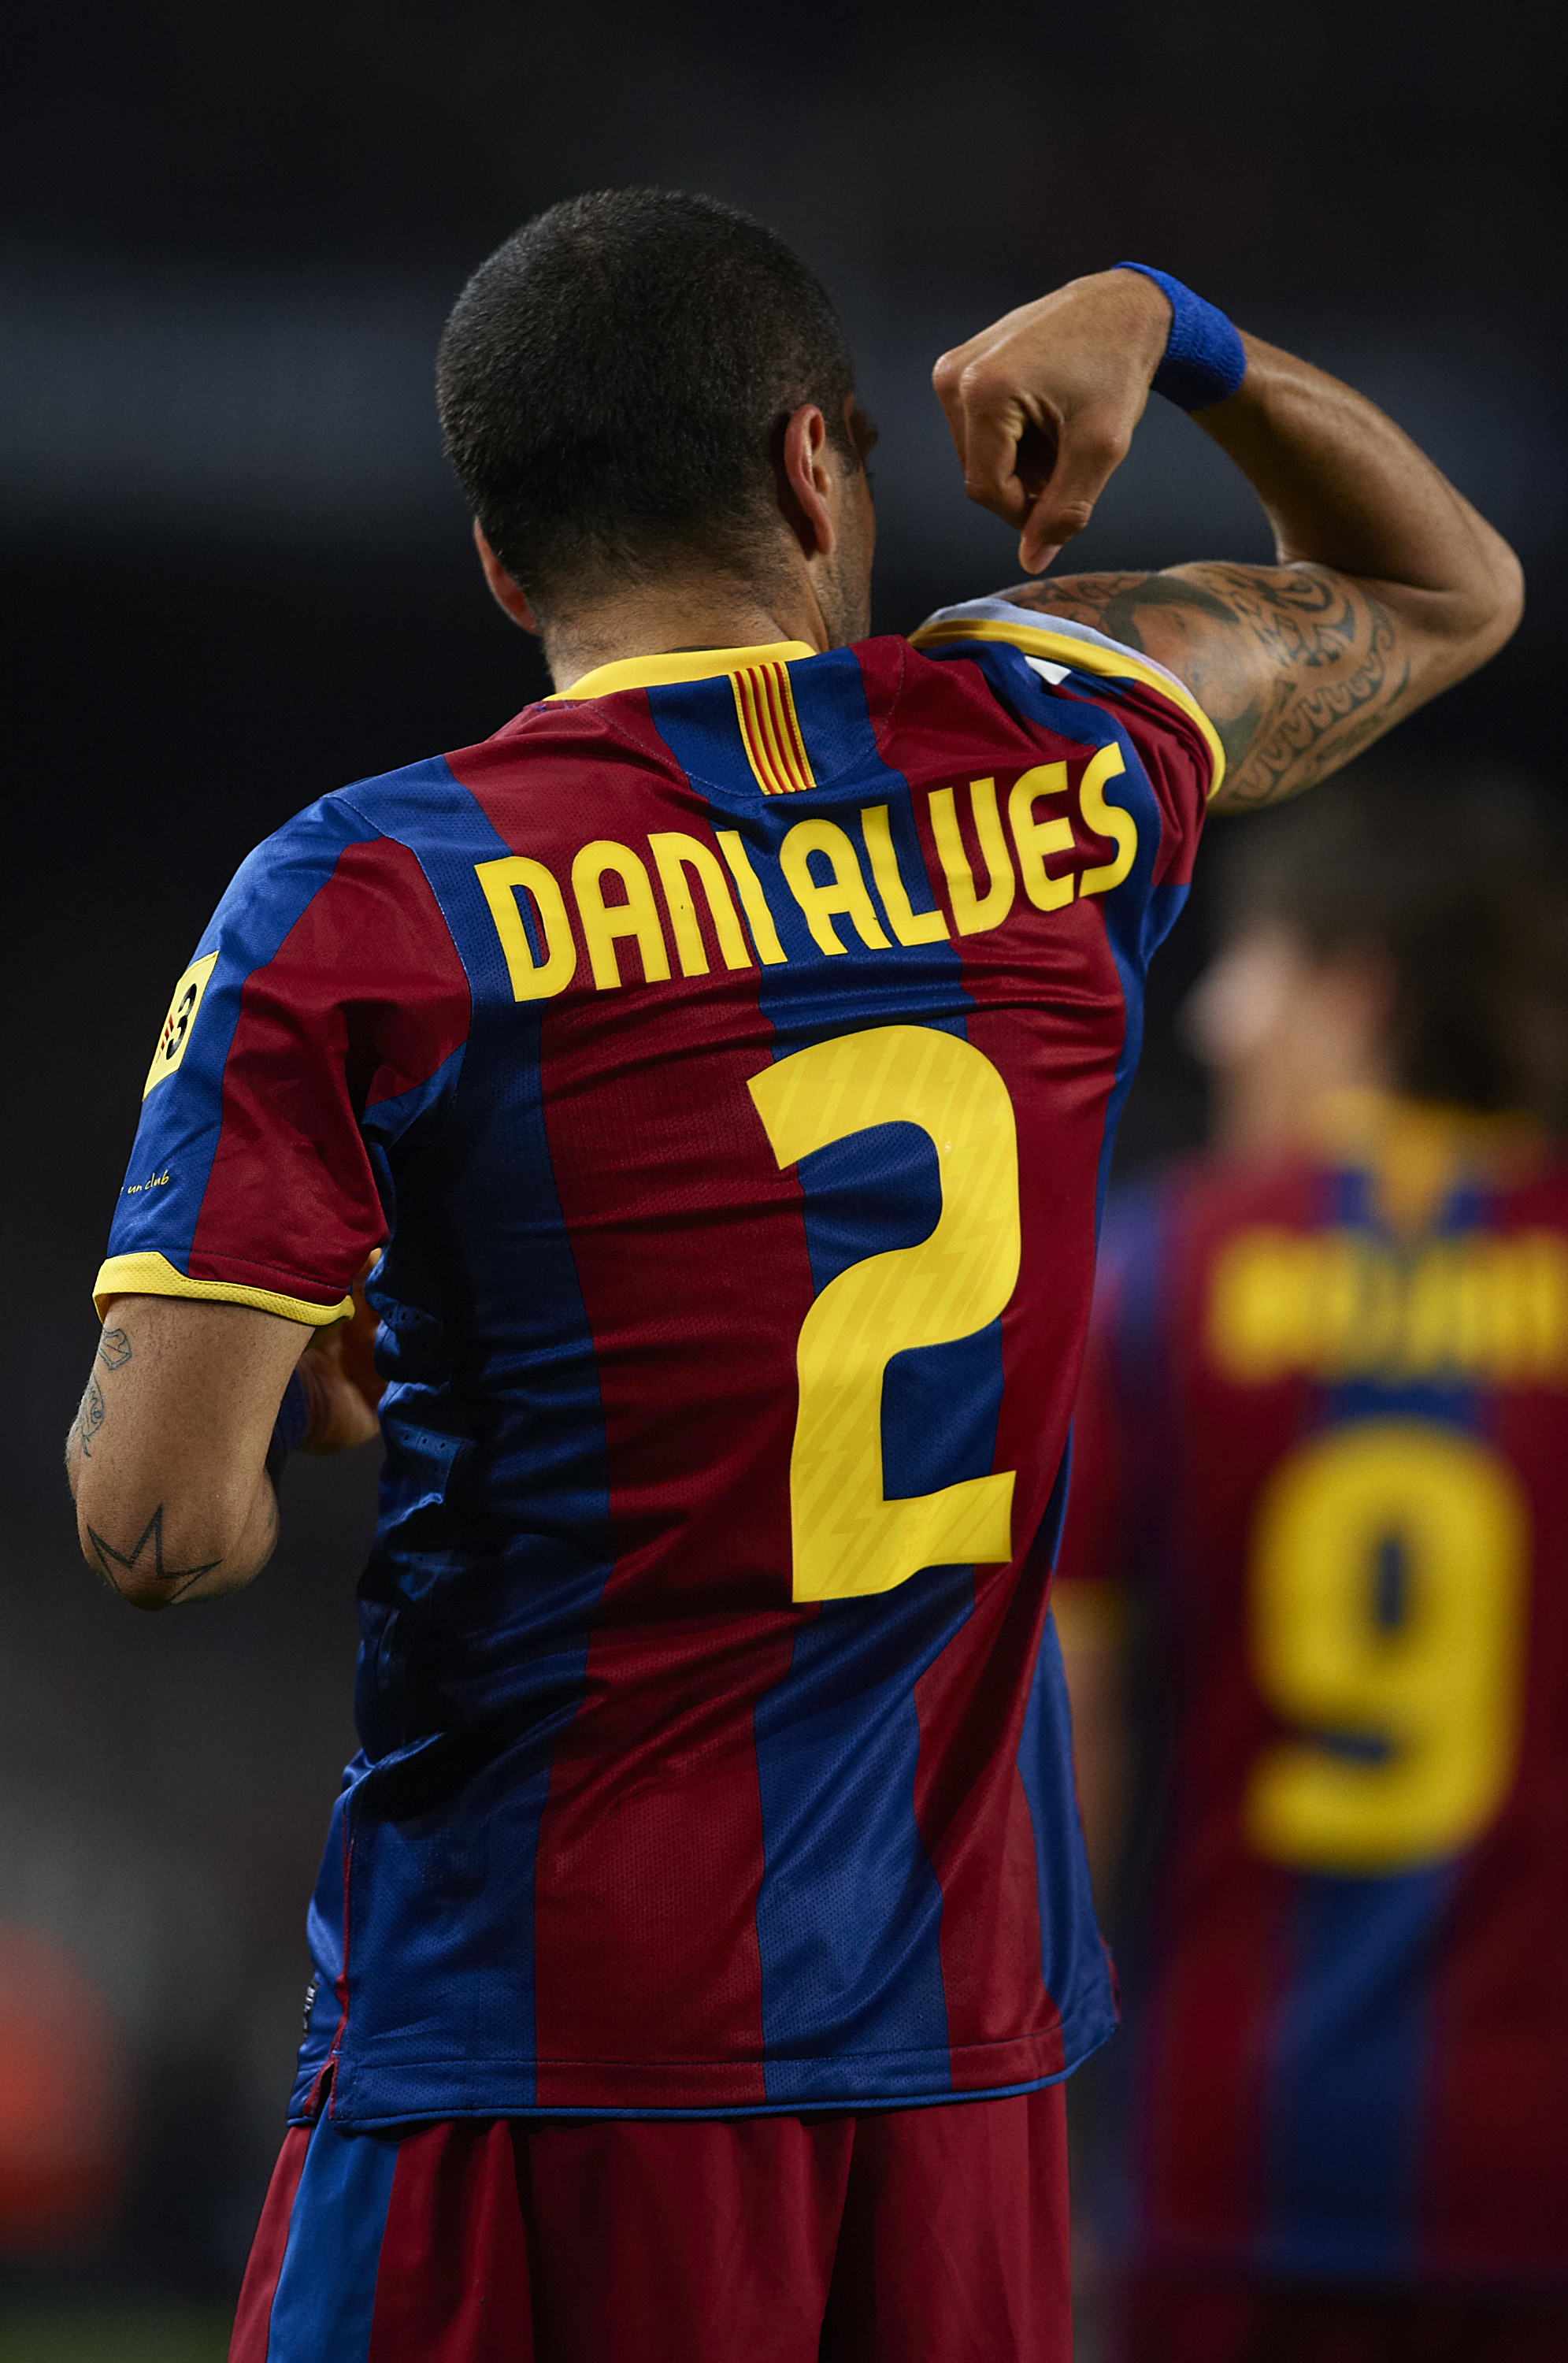 BARCELONA, SPAIN - MARCH 19:  Daniel Alves of Barcelona celebrates after scoring the opening goal during the La Liga match between Barcelona and Getafe at Camp Nou on March 19, 2011 in Barcelona, Spain.  (Photo by Manuel Queimadelos Alonso/Getty Images)